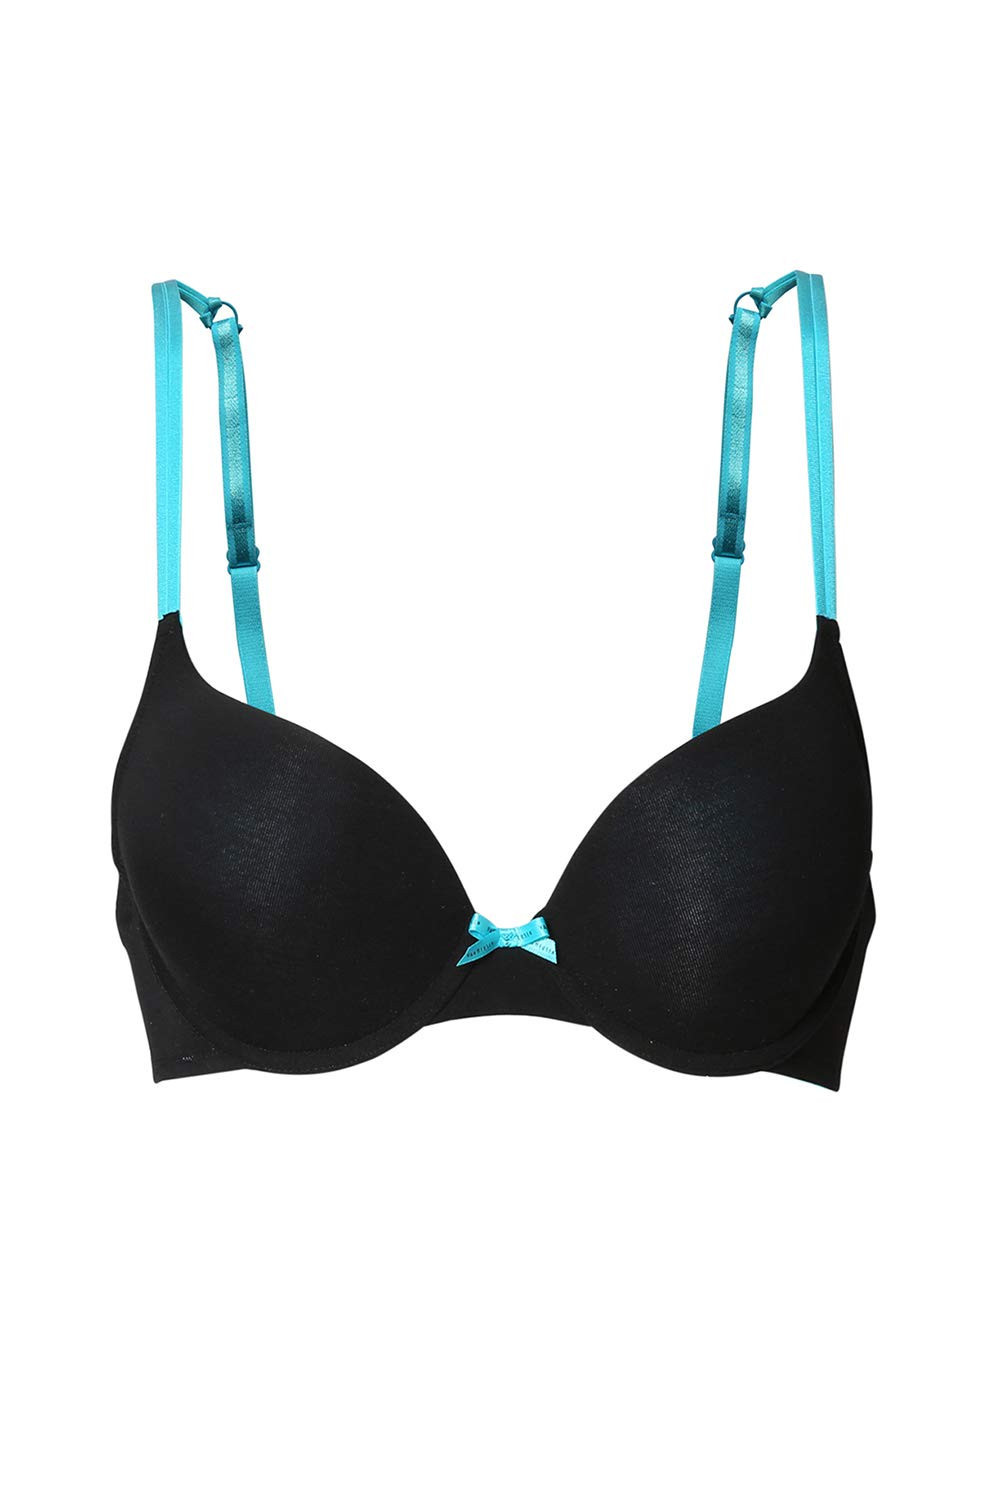 Amante XL Turquoise Bralette Bra in Phagwara - Dealers, Manufacturers &  Suppliers - Justdial